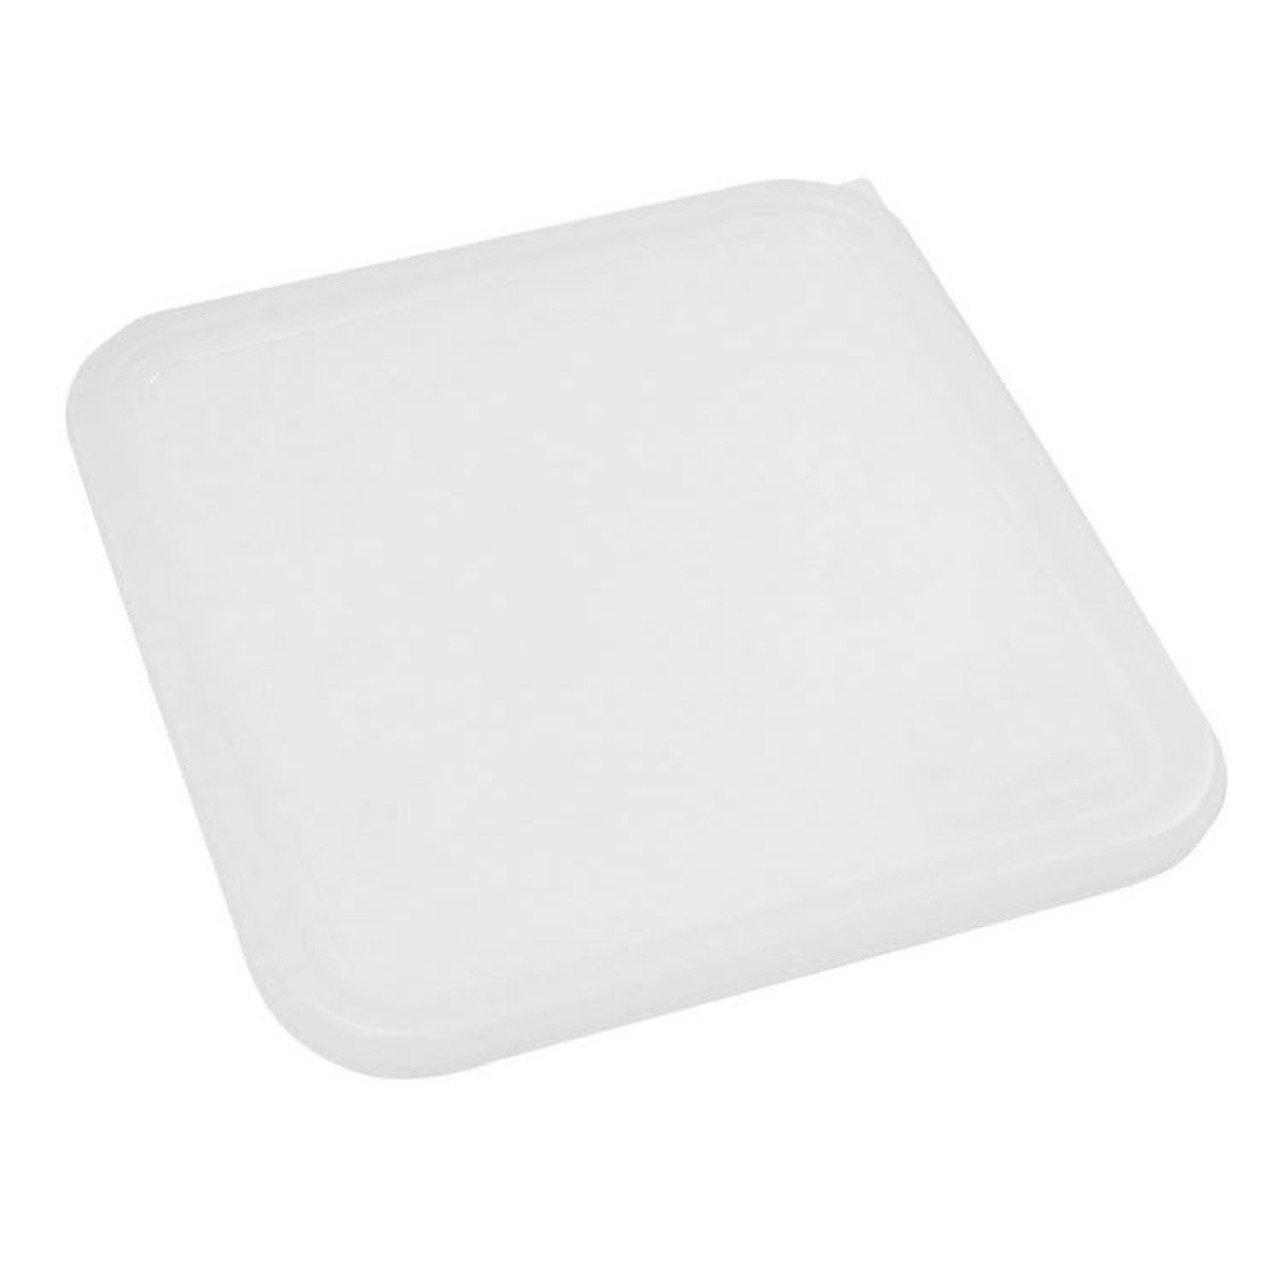 Rubbermaid Square Container Lid - Large White